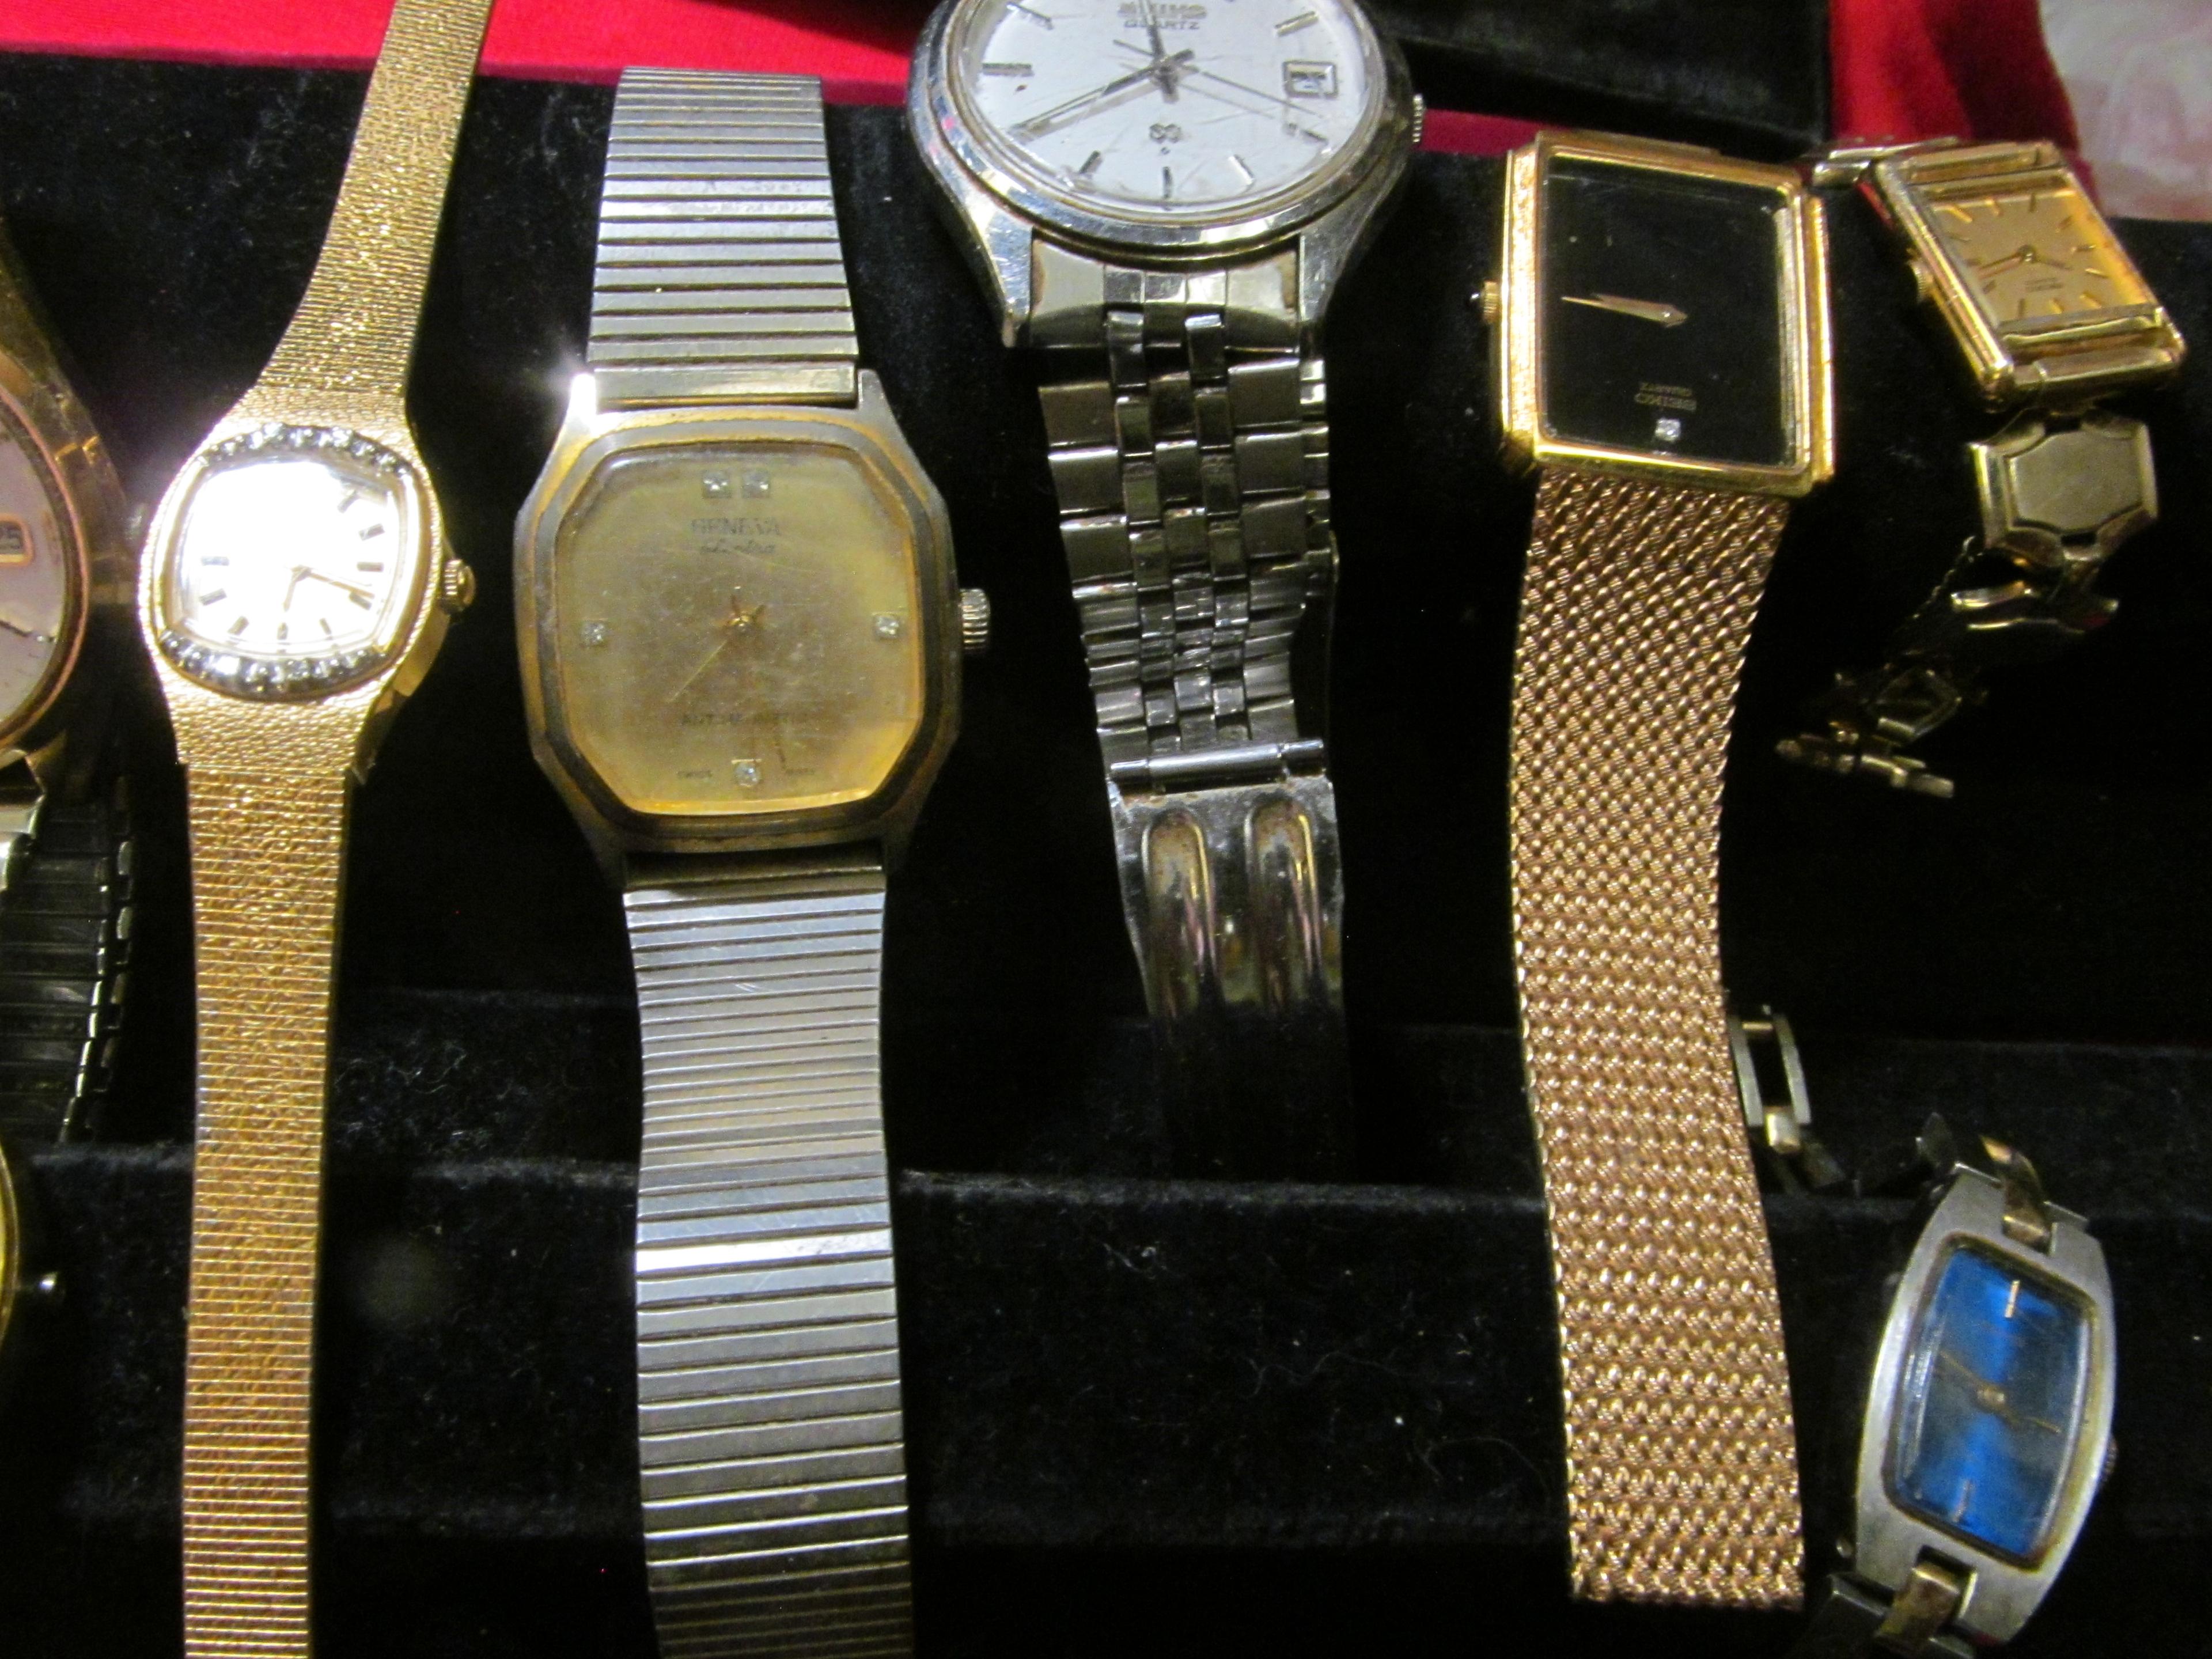 11 random watches for parts or repair, brands include Seiko, Bulova, Benrus and Hawthorne